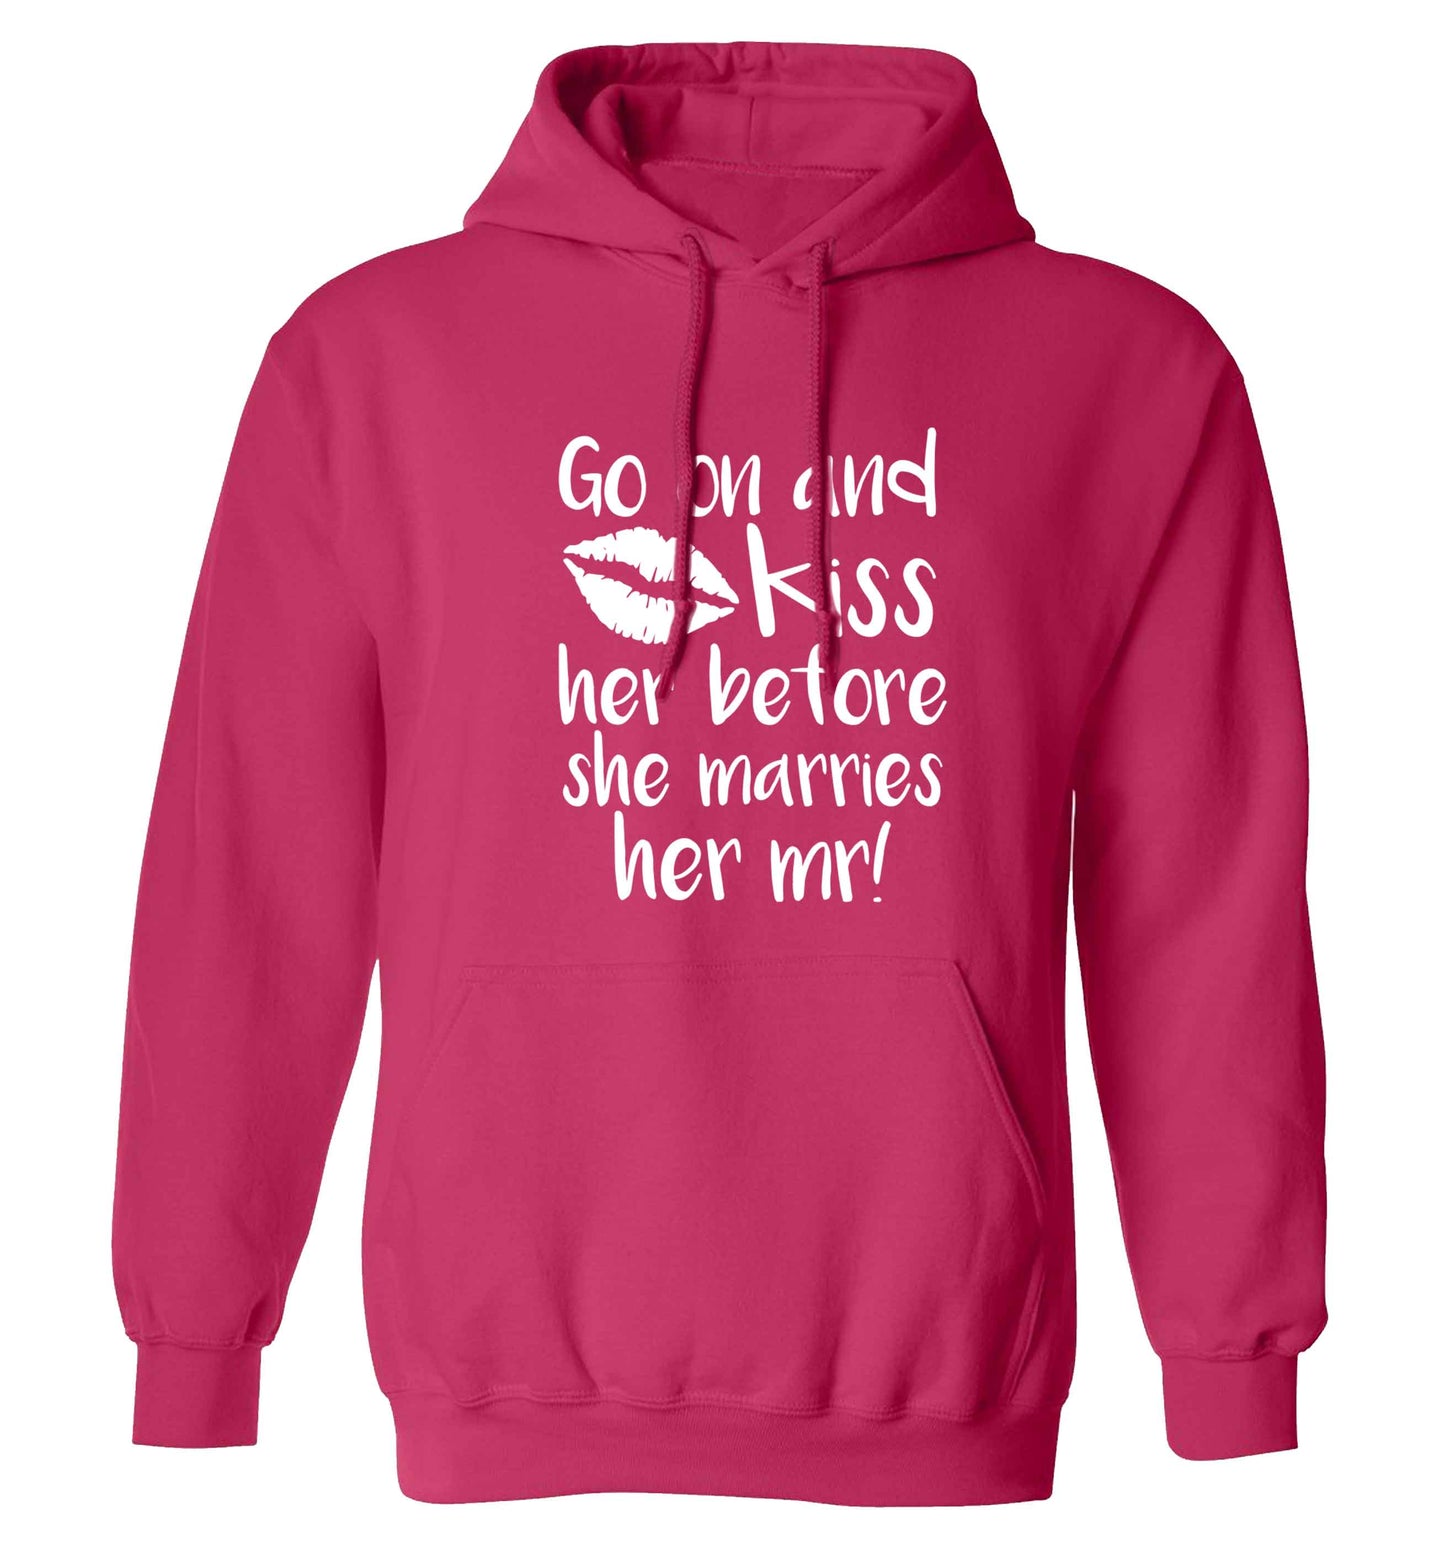 Kiss her before she marries her mr! adults unisex pink hoodie 2XL